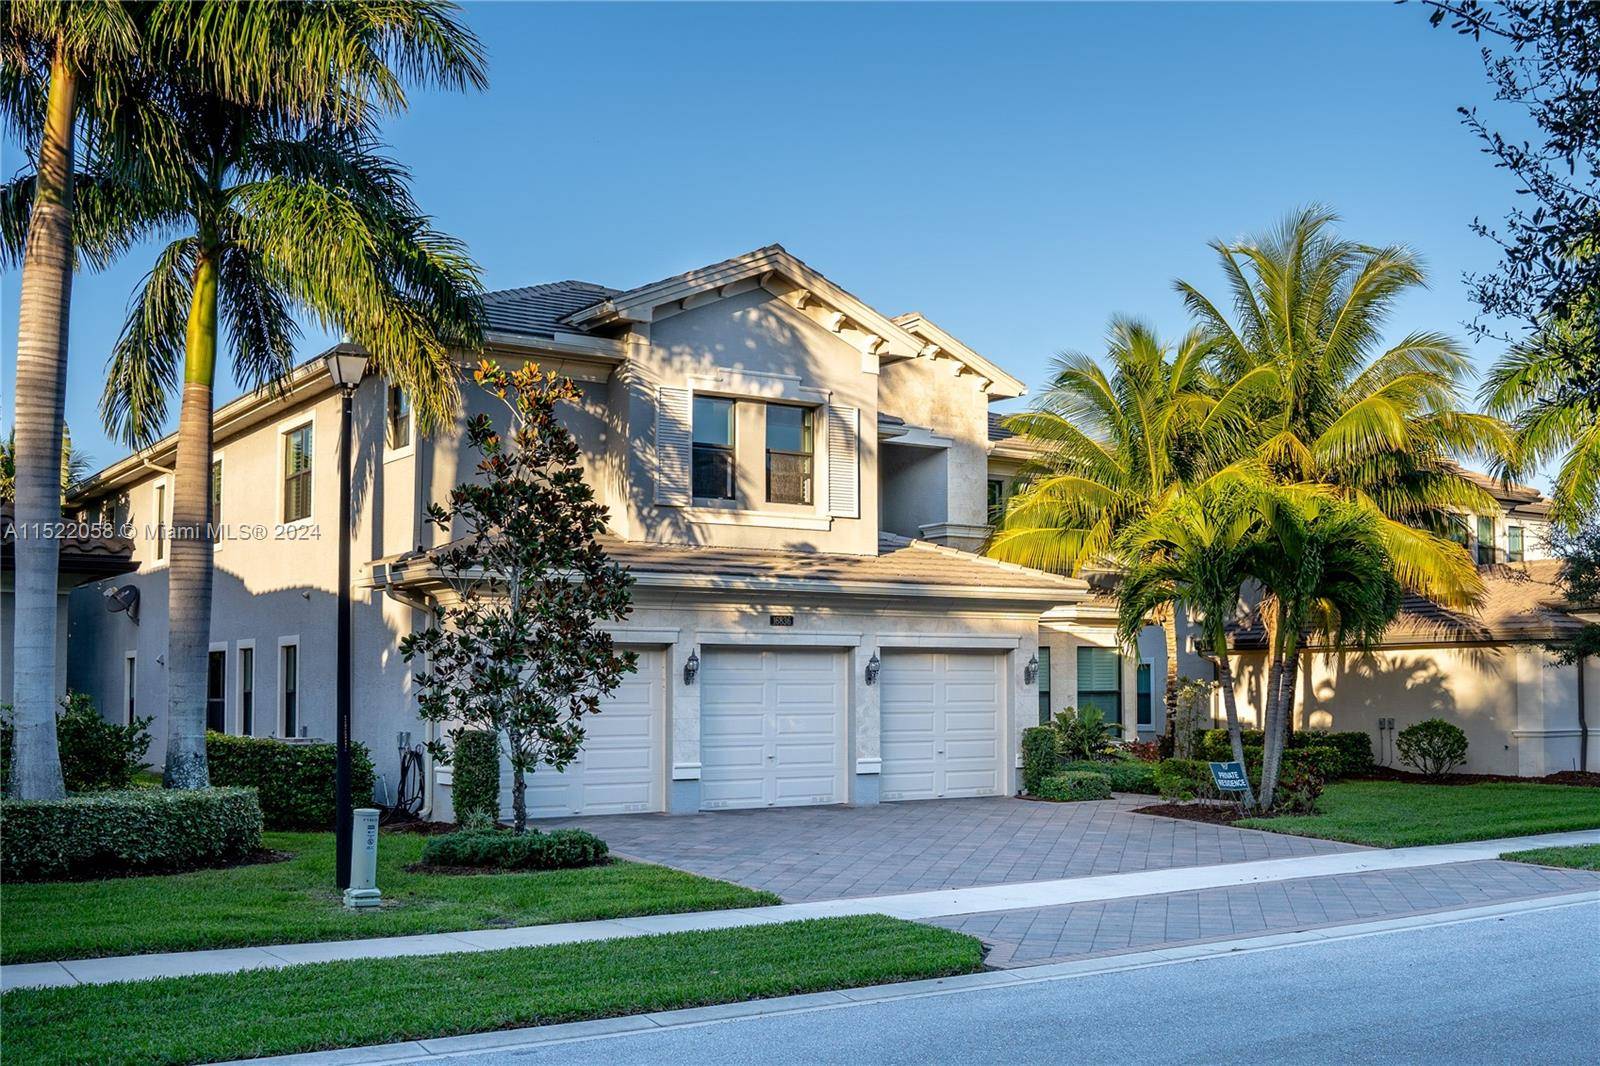 Introducing an exquisite residence in the prestigious 7 Bridges community Delray Beach, where luxury living meets unparalleled amenities.